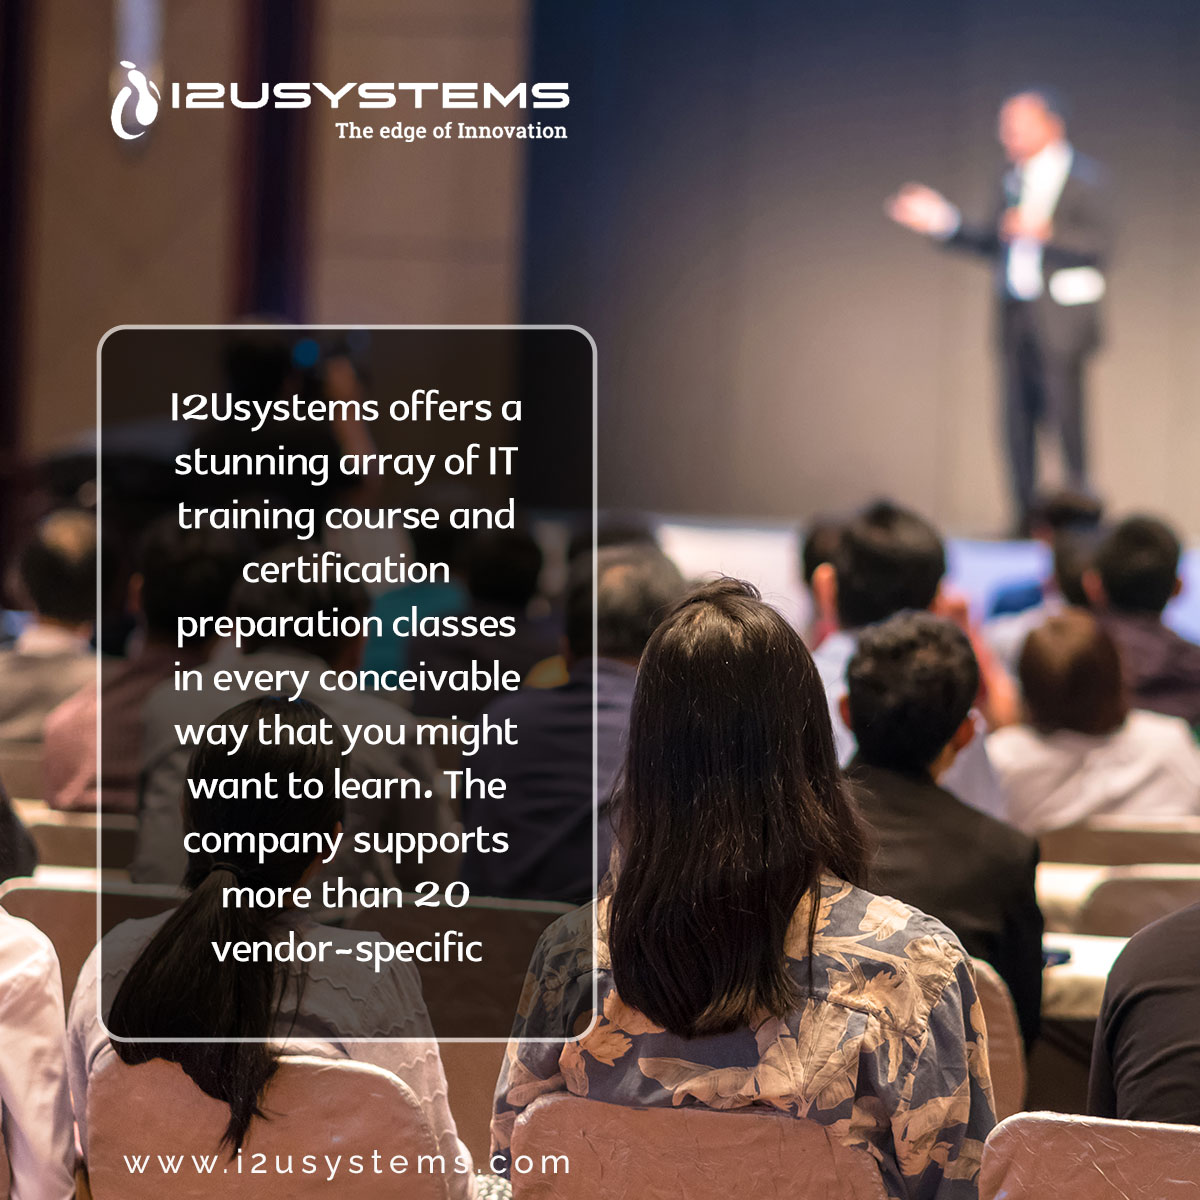 I2Usystems offers a stunning array of IT training course and certification preparation classes in every conceivable way that you might want to learn. #i2usystems #c2crequirements #w2jobs #directclient #benchsales #IOT #certification #IT_training #supports #vendor #specific